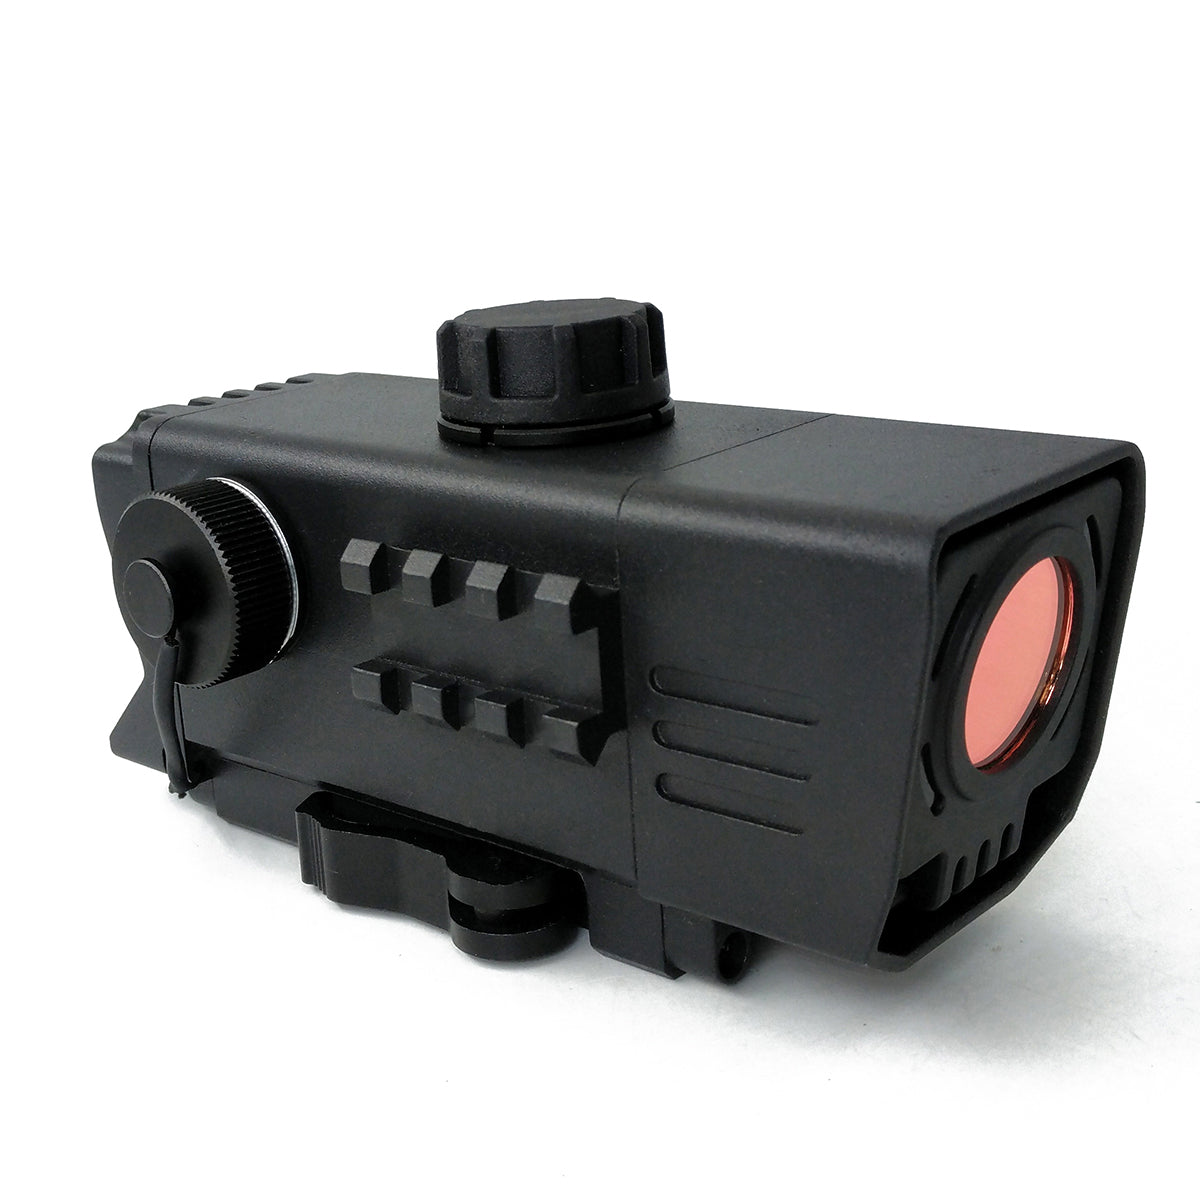 Tontube Infrared Night Vision Red Dot Digital Laser Sniper Scope with Reticle for Sale